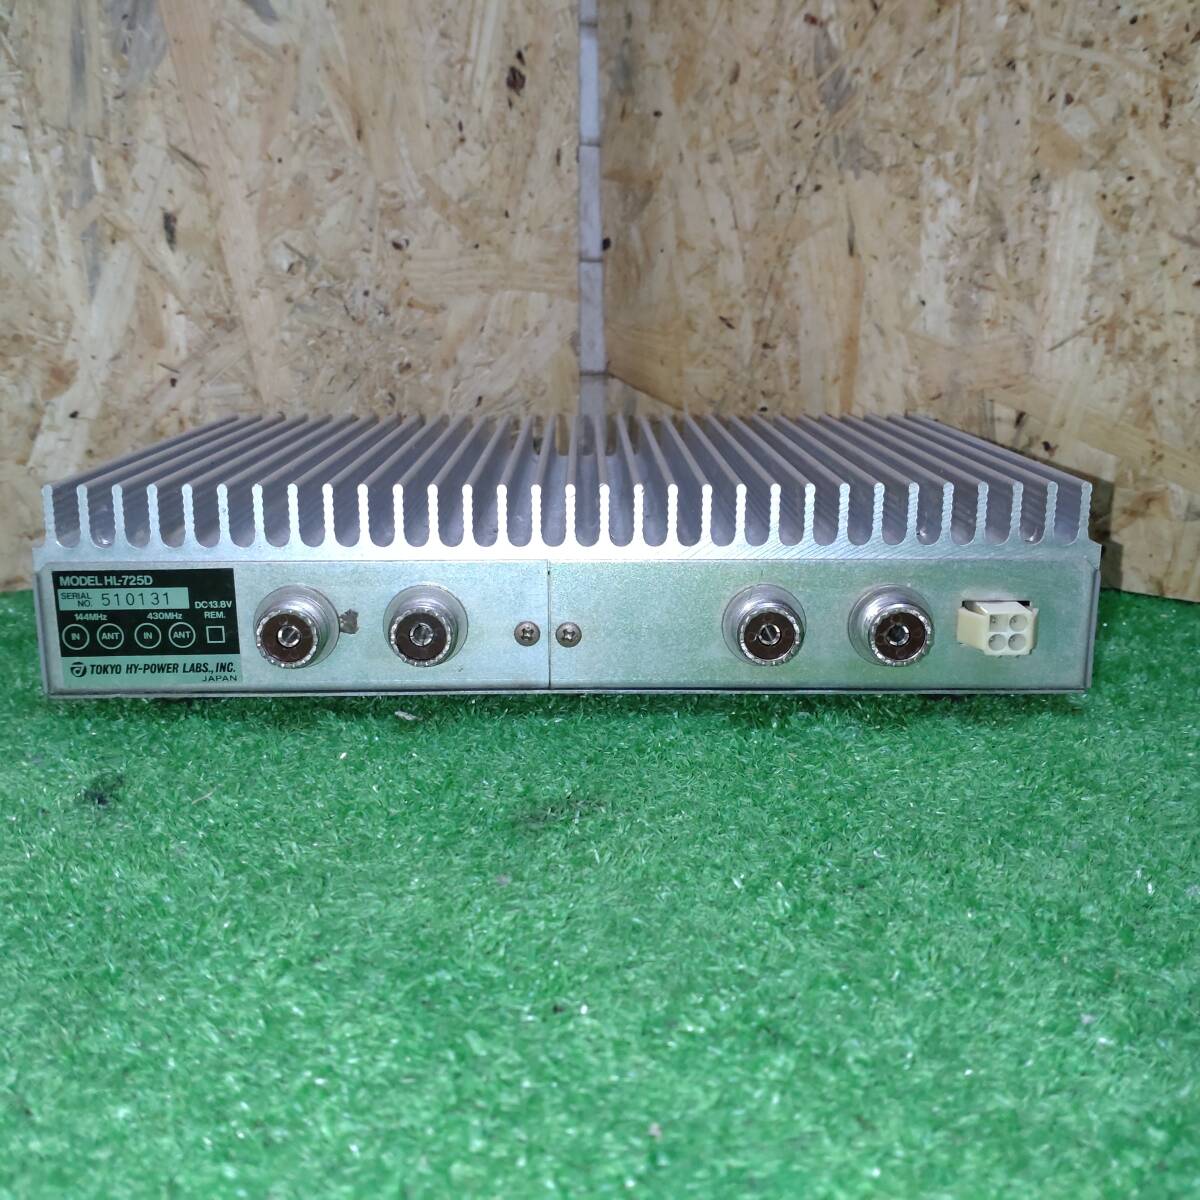 TOKYO HY-POWER Tokyo high power 144/430MHz50W linear HL-725D present condition goods [T17739]